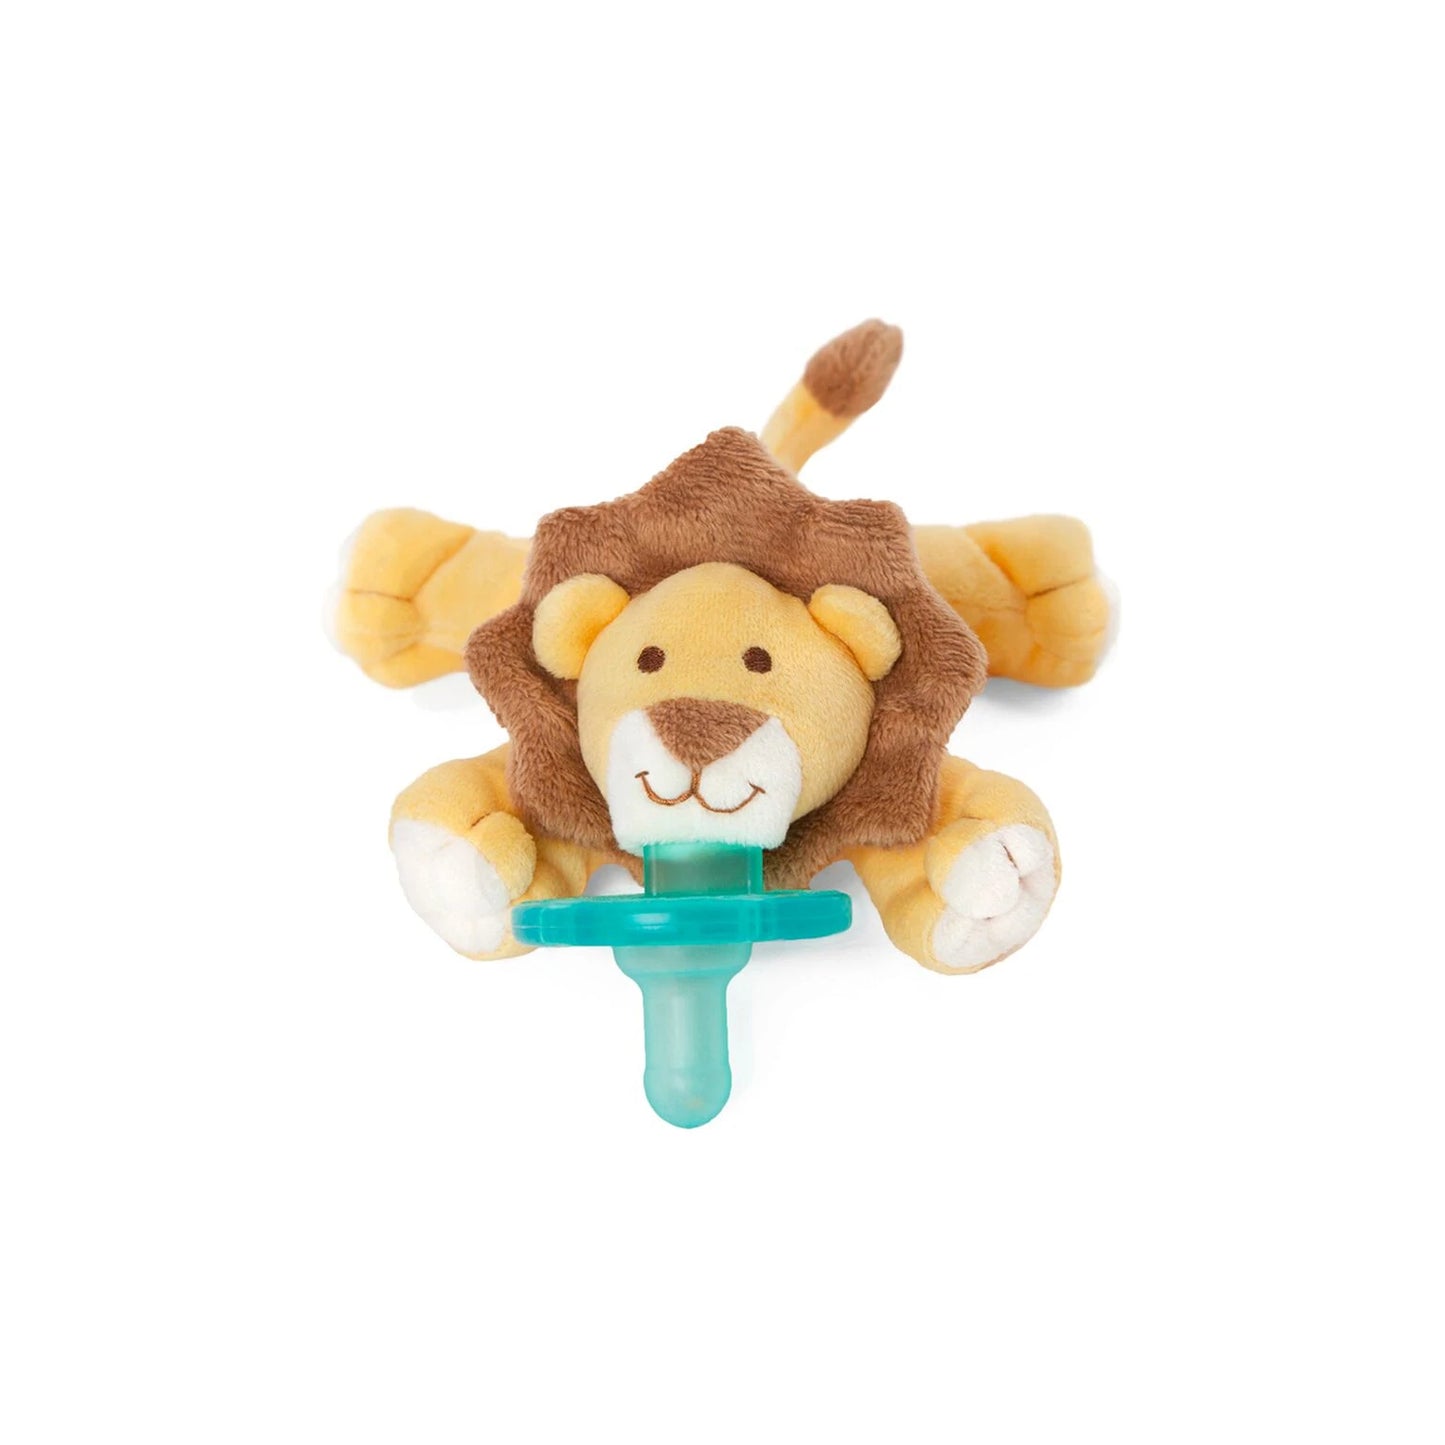 Sensory Pacifier & Teether Holder with Silicone Pacifier - BambiniJO | Buy Online | Jordan